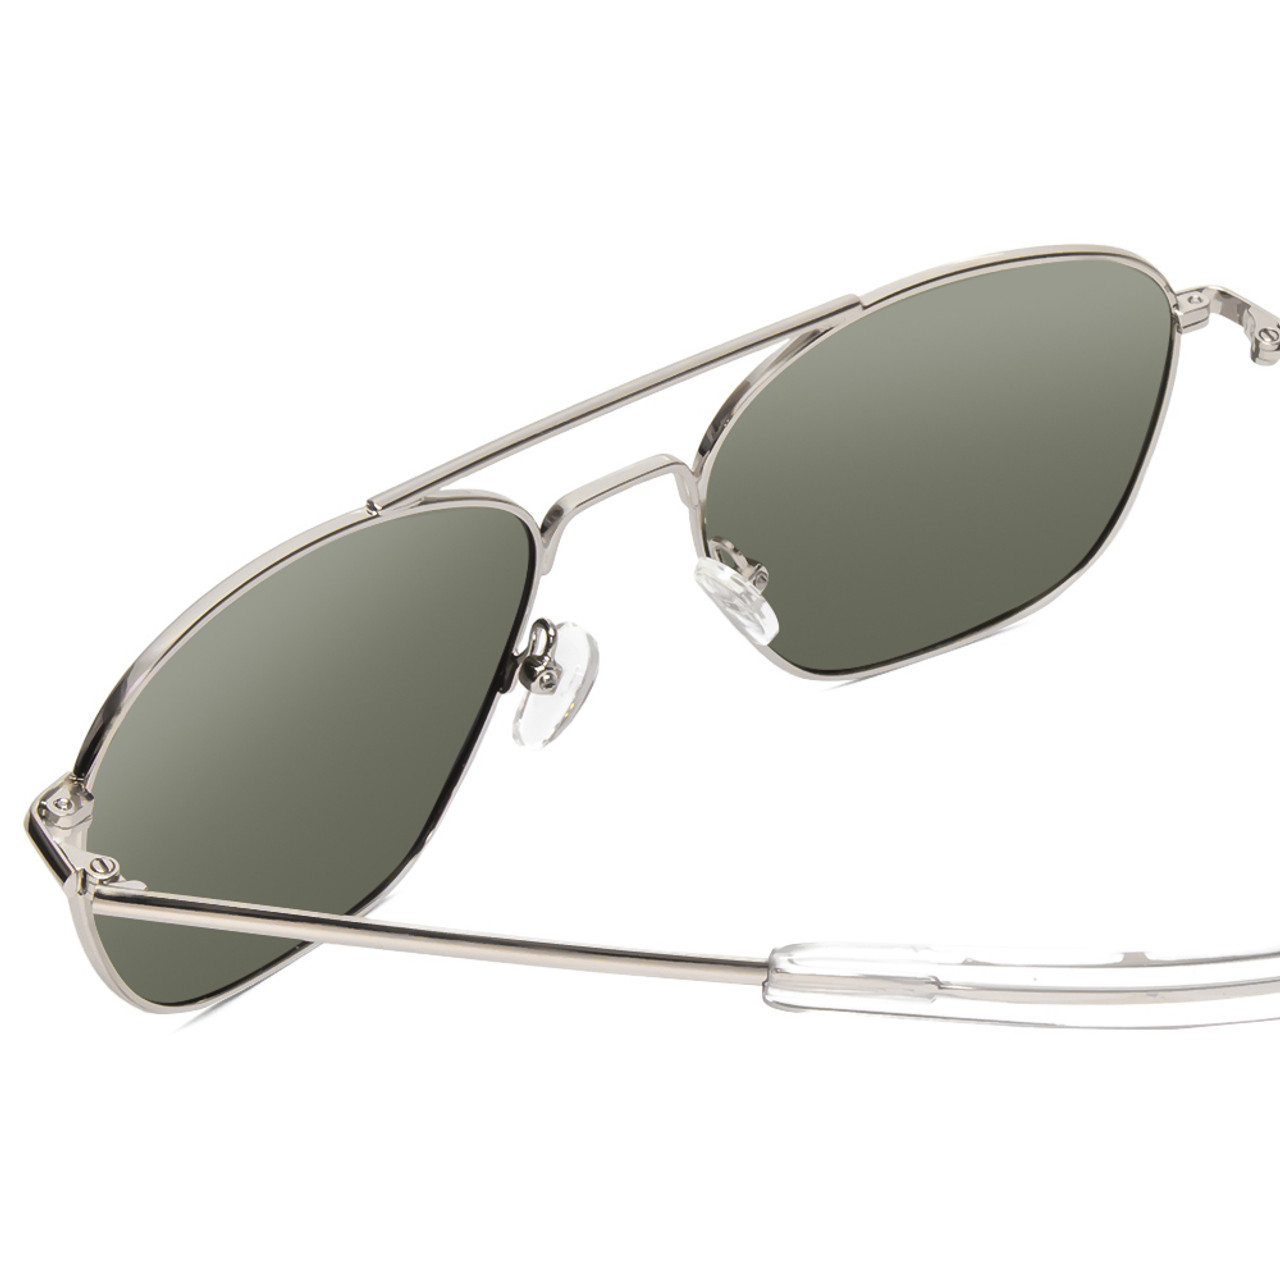 Close Up View of Ernest Hemingway H202 55 mm Metal Pilot Polarized Sunglasses Silver&Green/Blue